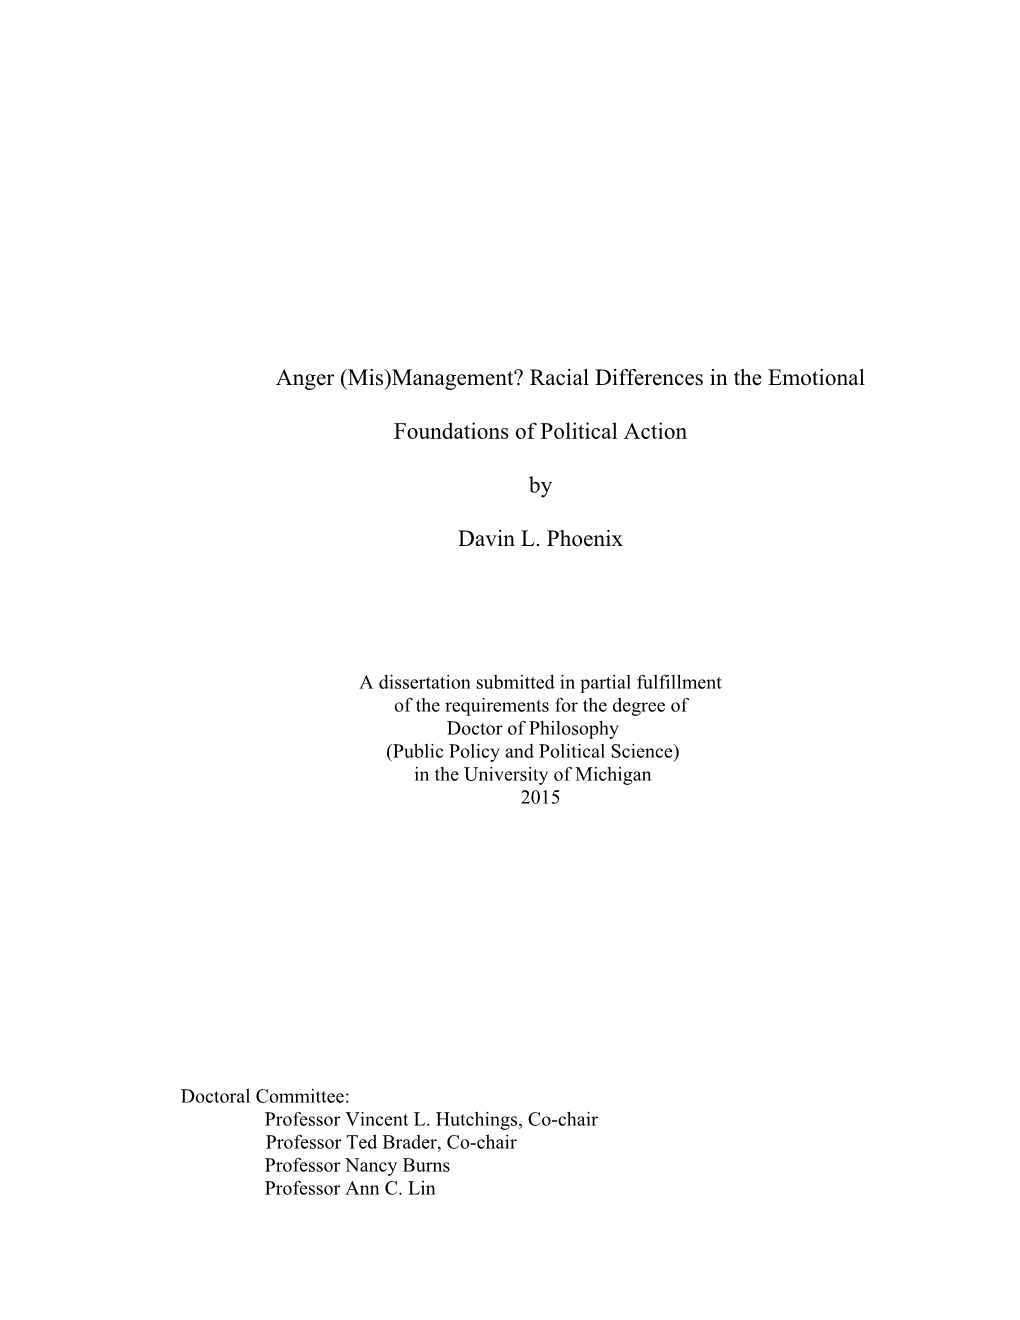 Anger (Mis)Management? Racial Differences in the Emotional